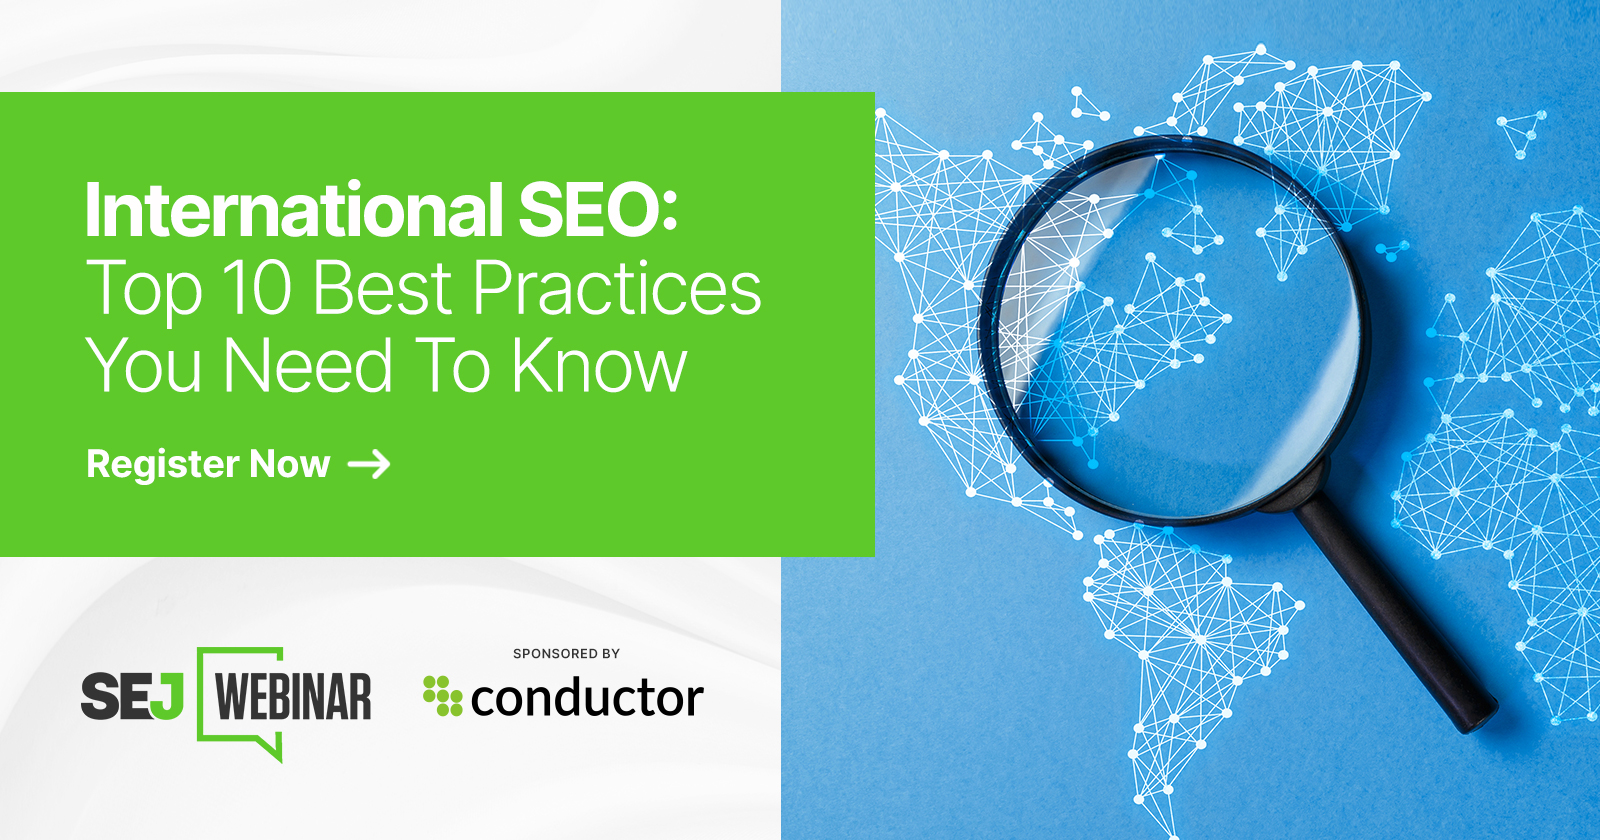 International SEO: Top 10 Best Practices You Need To Know [Webinar]